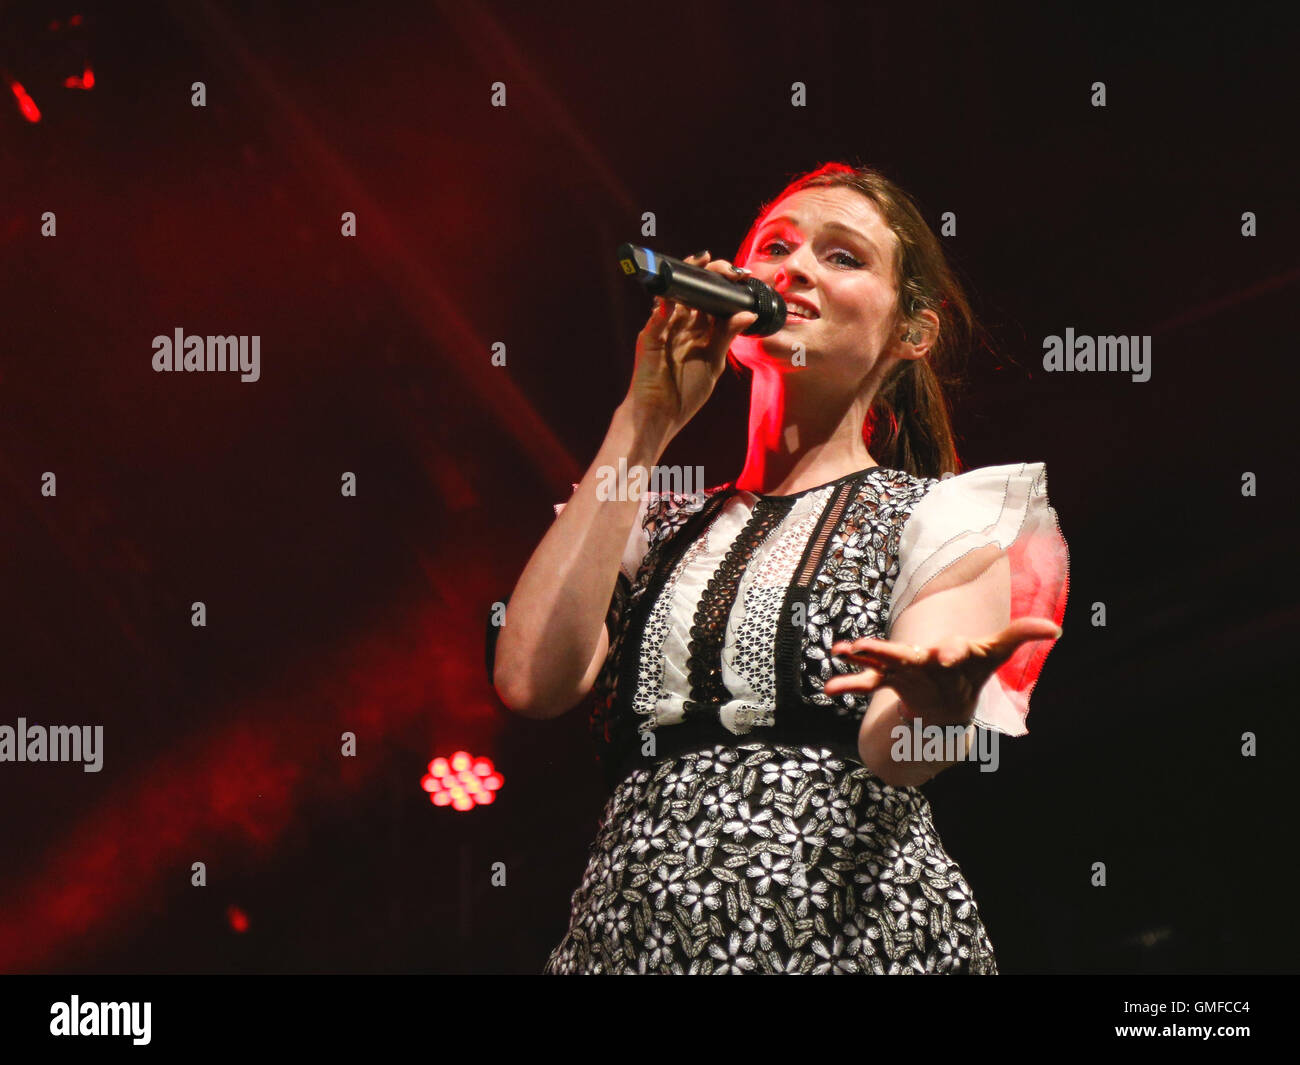 Sophie Ellis Bextor High Resolution Stock Photography and Images - Alamy